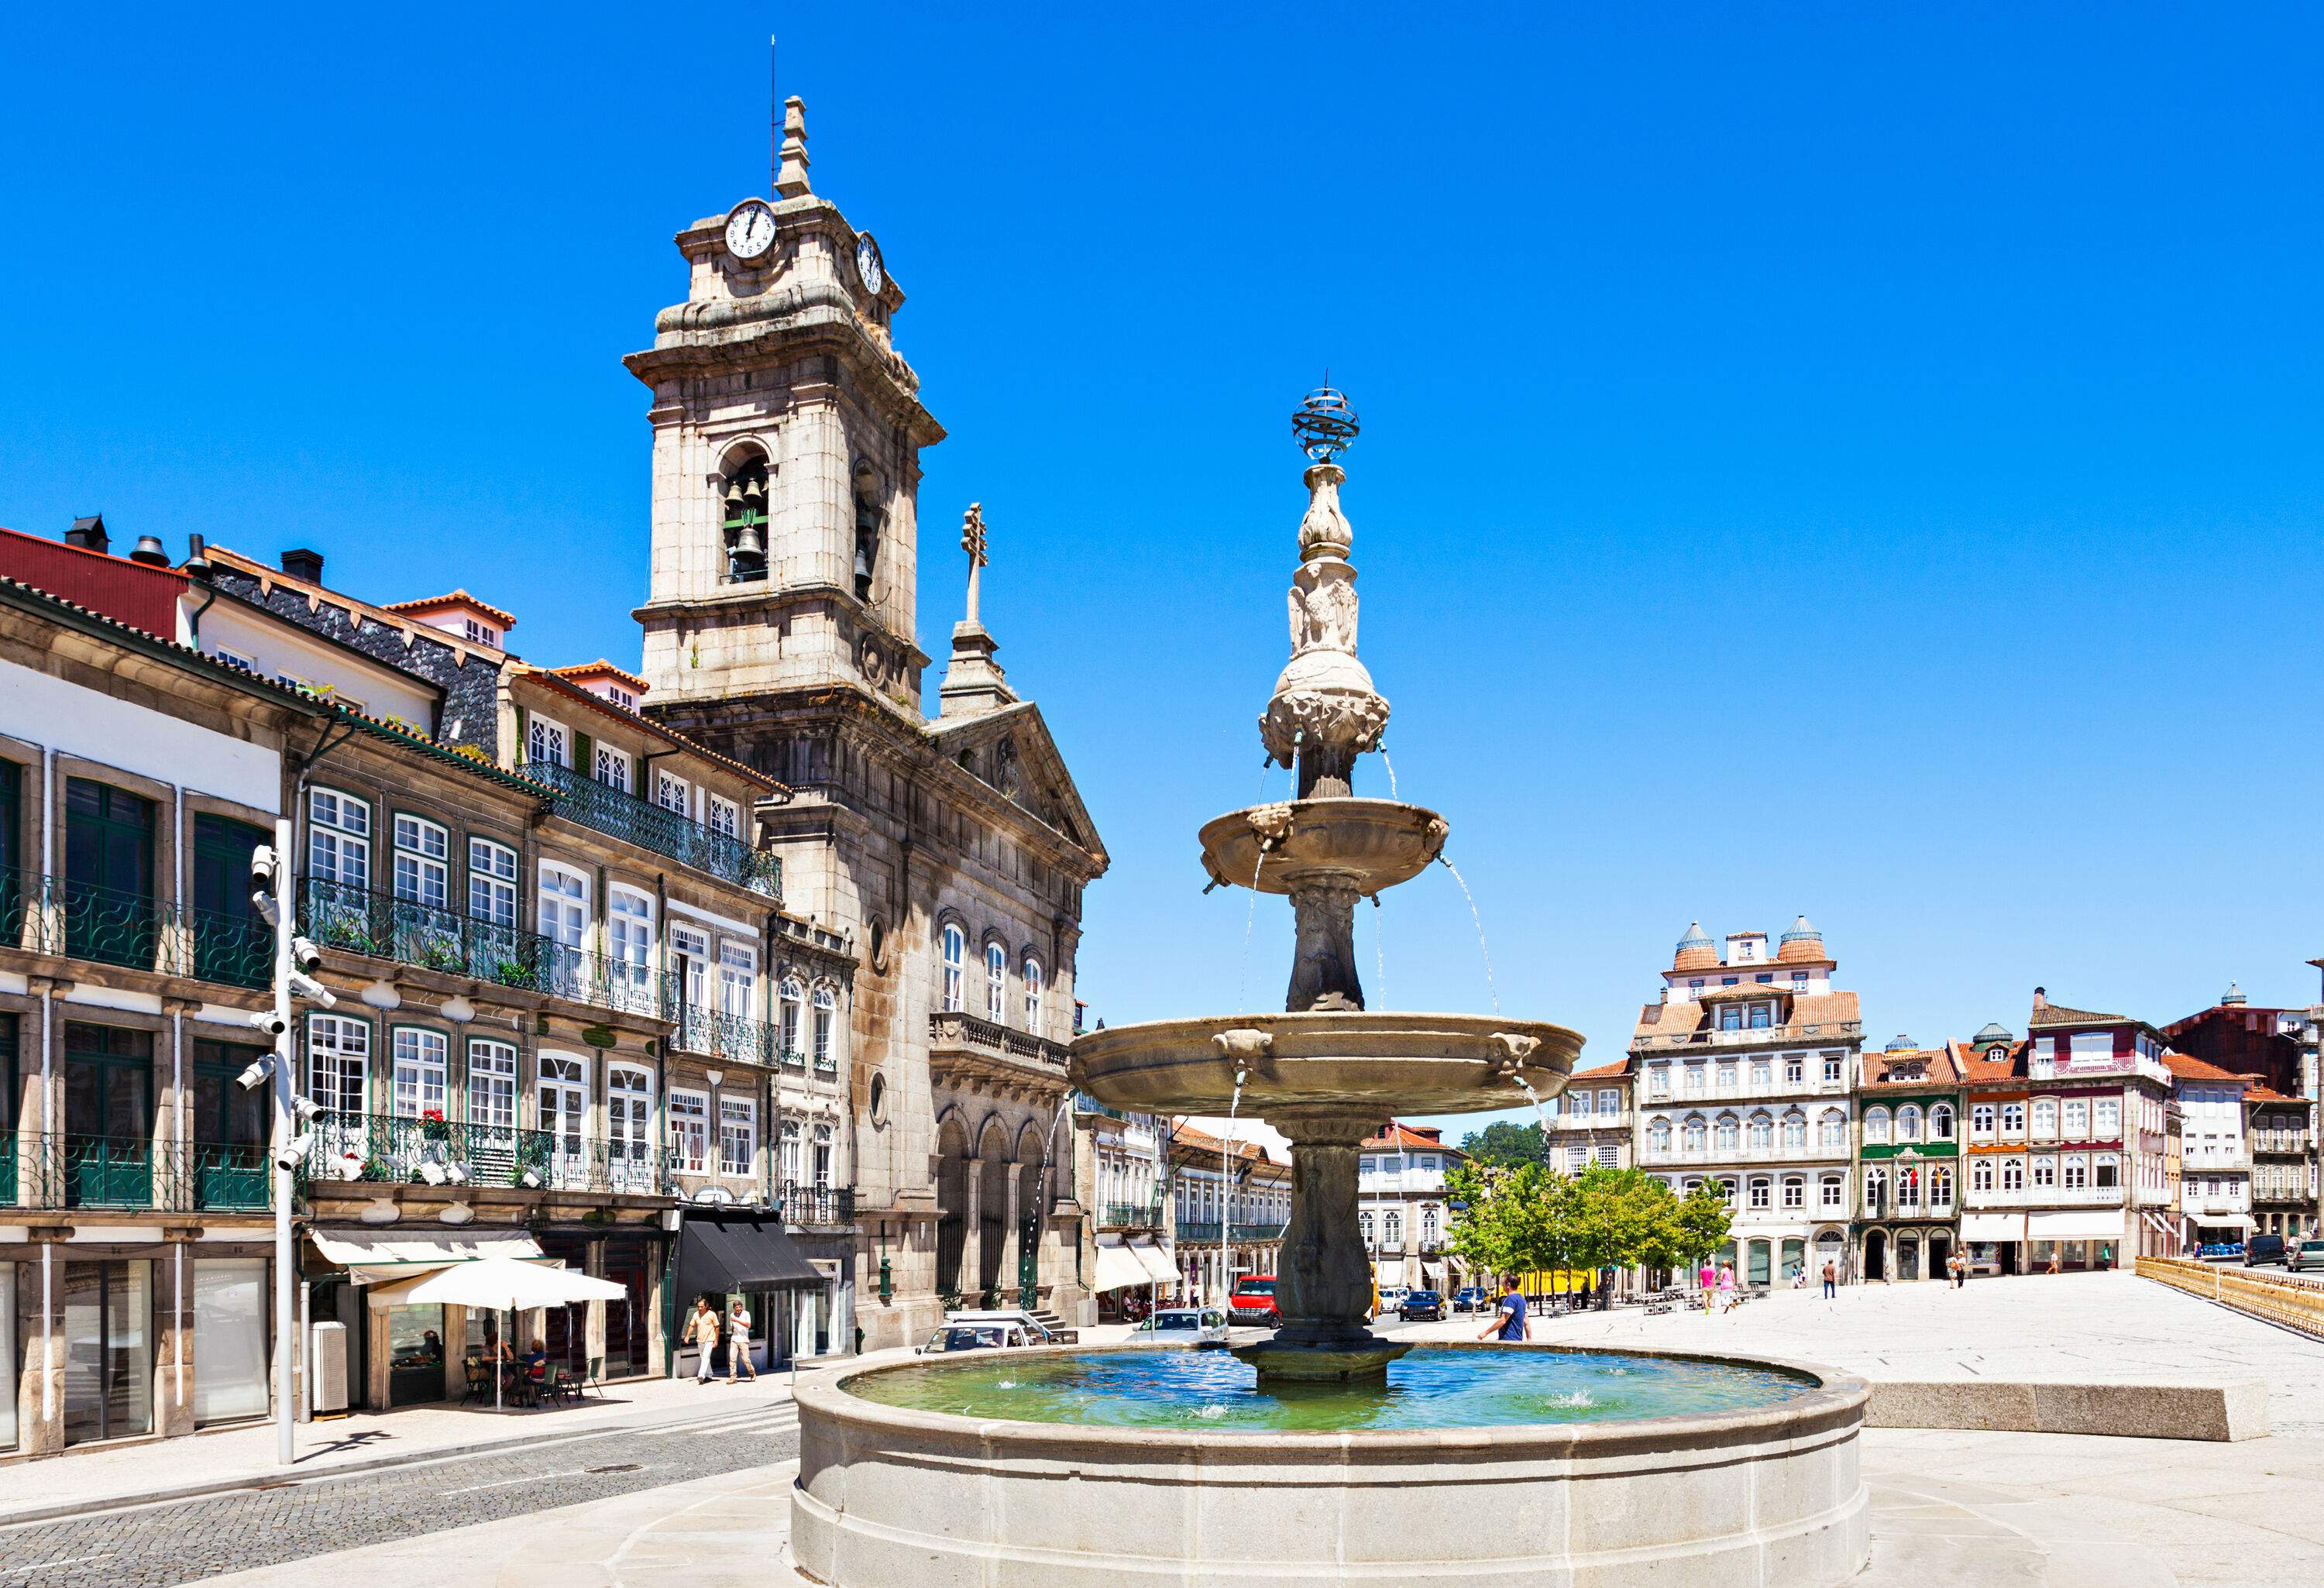 A water fountain in a church square surrounded by historic architecture.